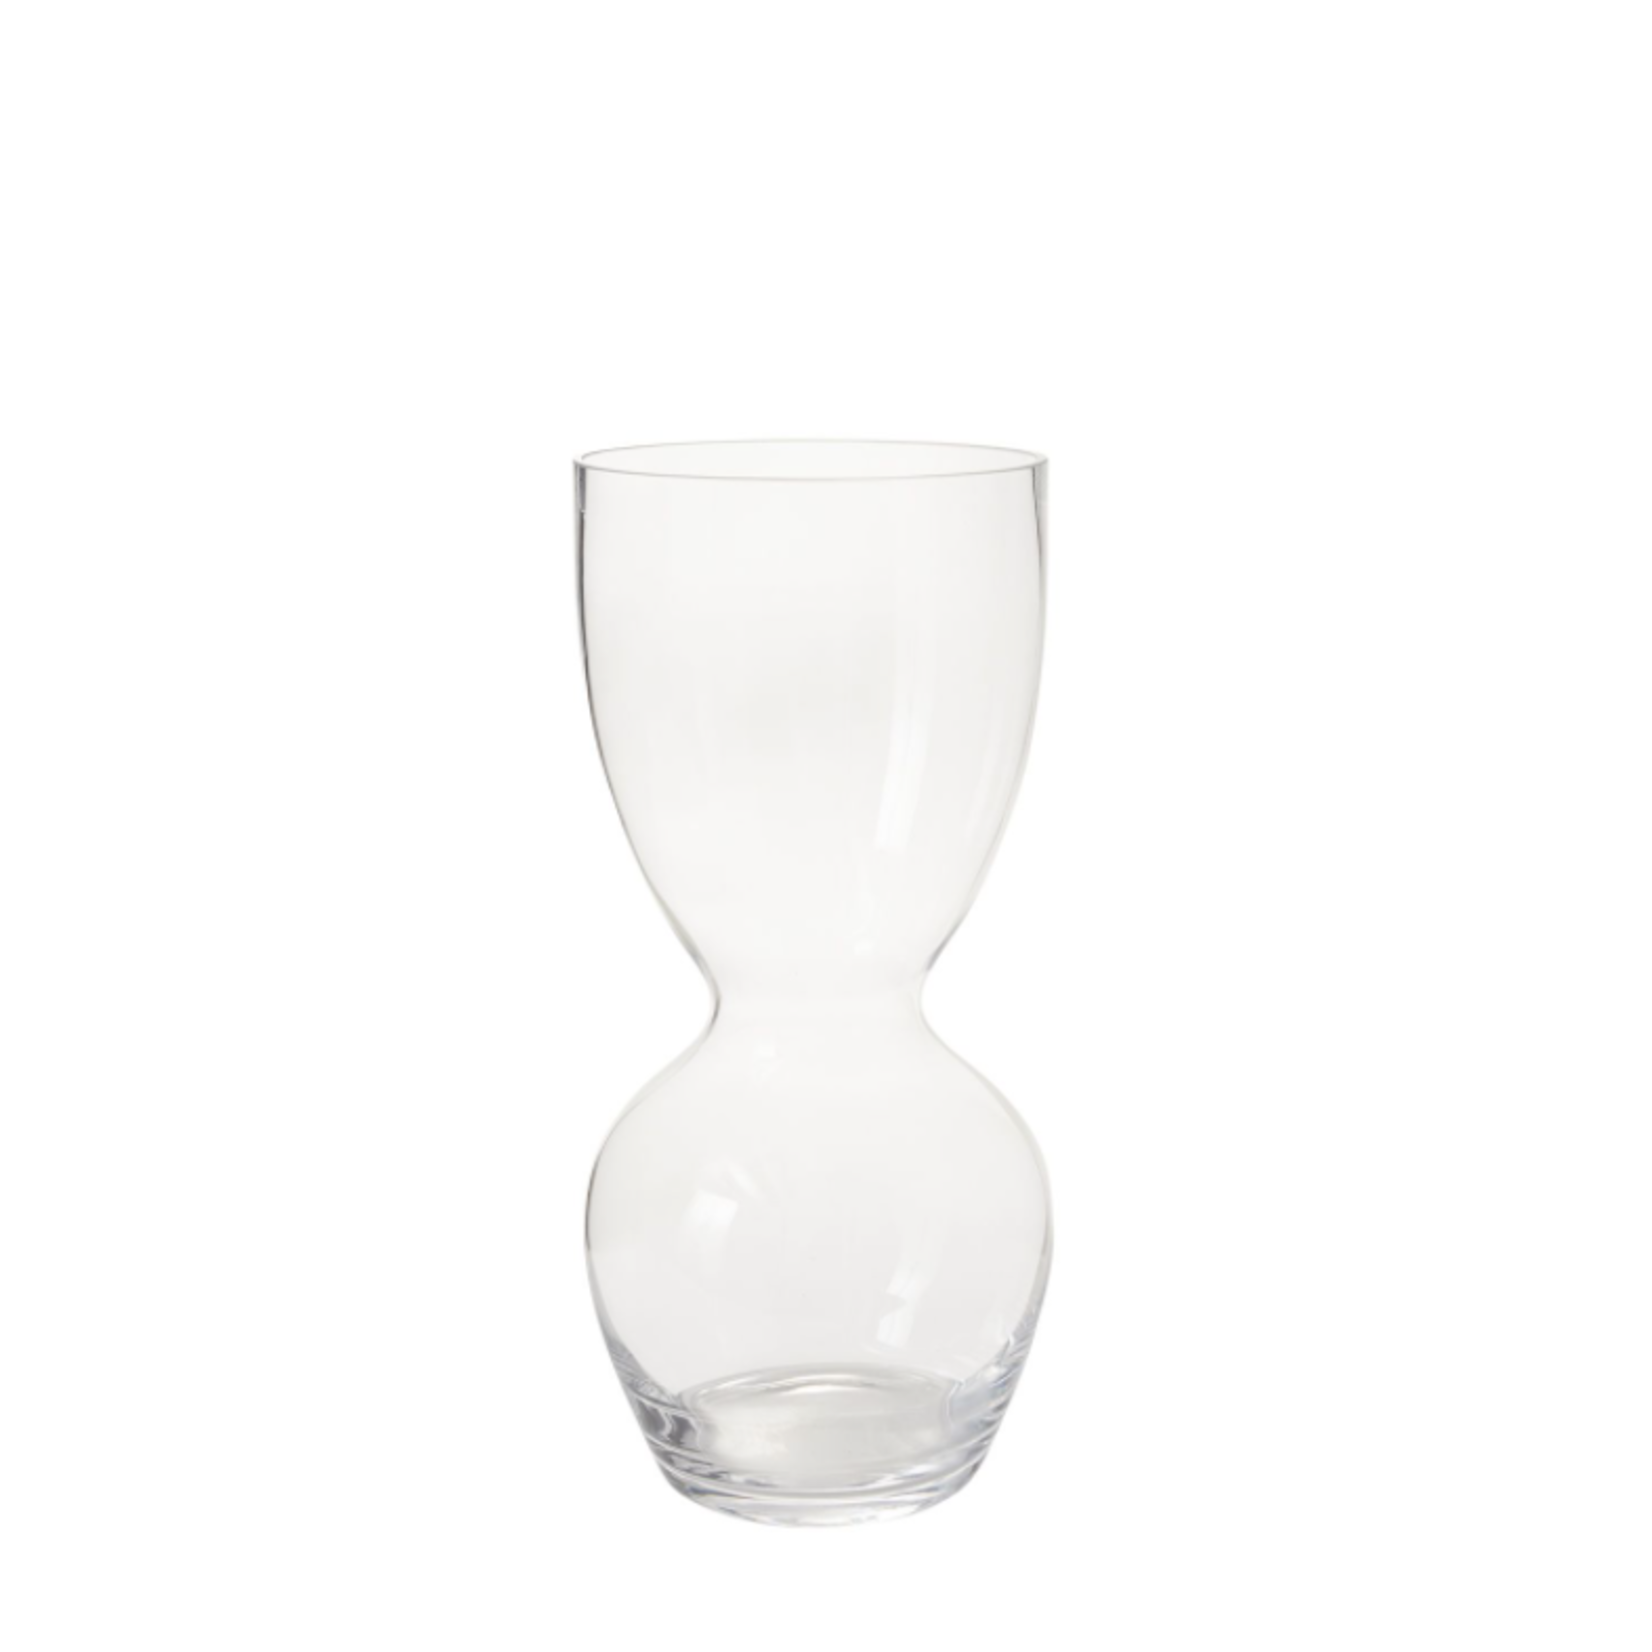 40% off was $113 now $67.79. 19.75”H X 9” GLASS CAMPANA VASE